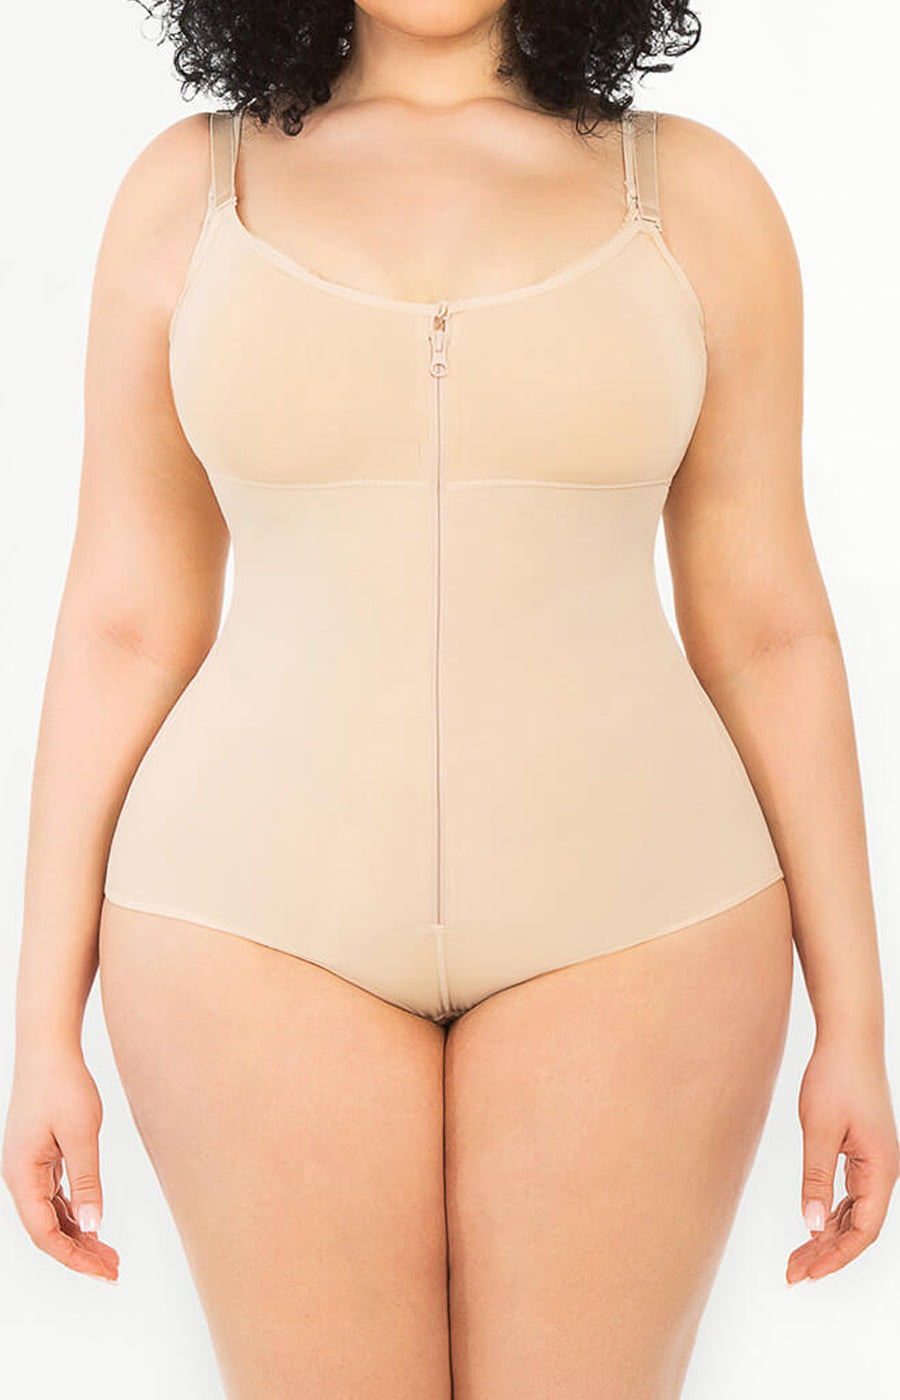 Shapewear for Women Tummy Control Women's Shapewear Faja Body Shaper Women  High-Waisted Tummy Control Butt Lifter Lace Control Knickers Shapewear Pant  with Hook and Eye XS-6XL Plus Size